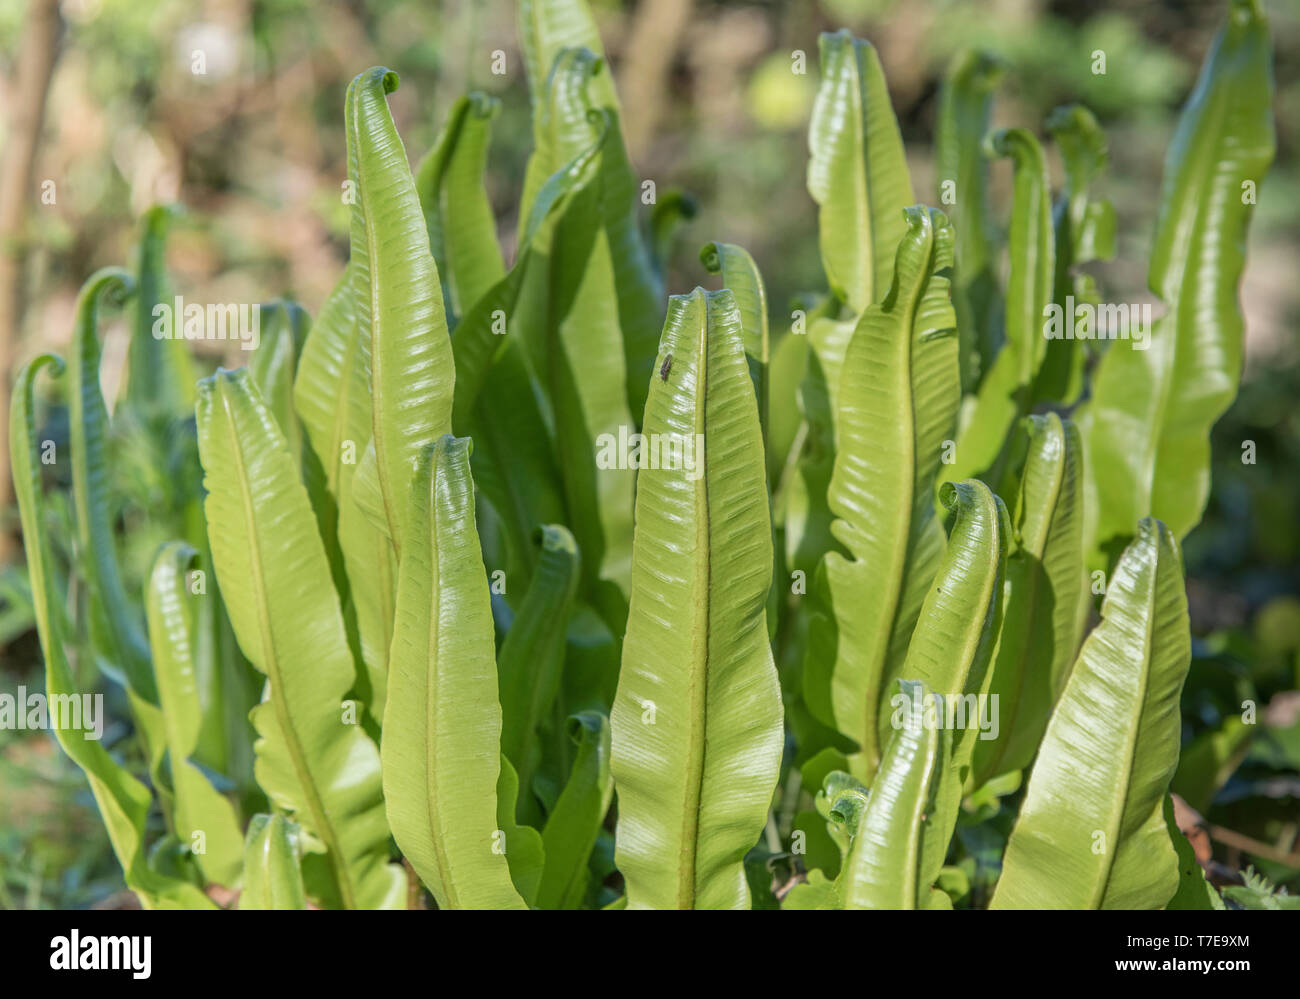 Curled leaves of Hart's Tongue Fern / Asplenium scolopendrium - once used in herbal medicine for liver complaints. Sorus / sori visible on underside. Stock Photo